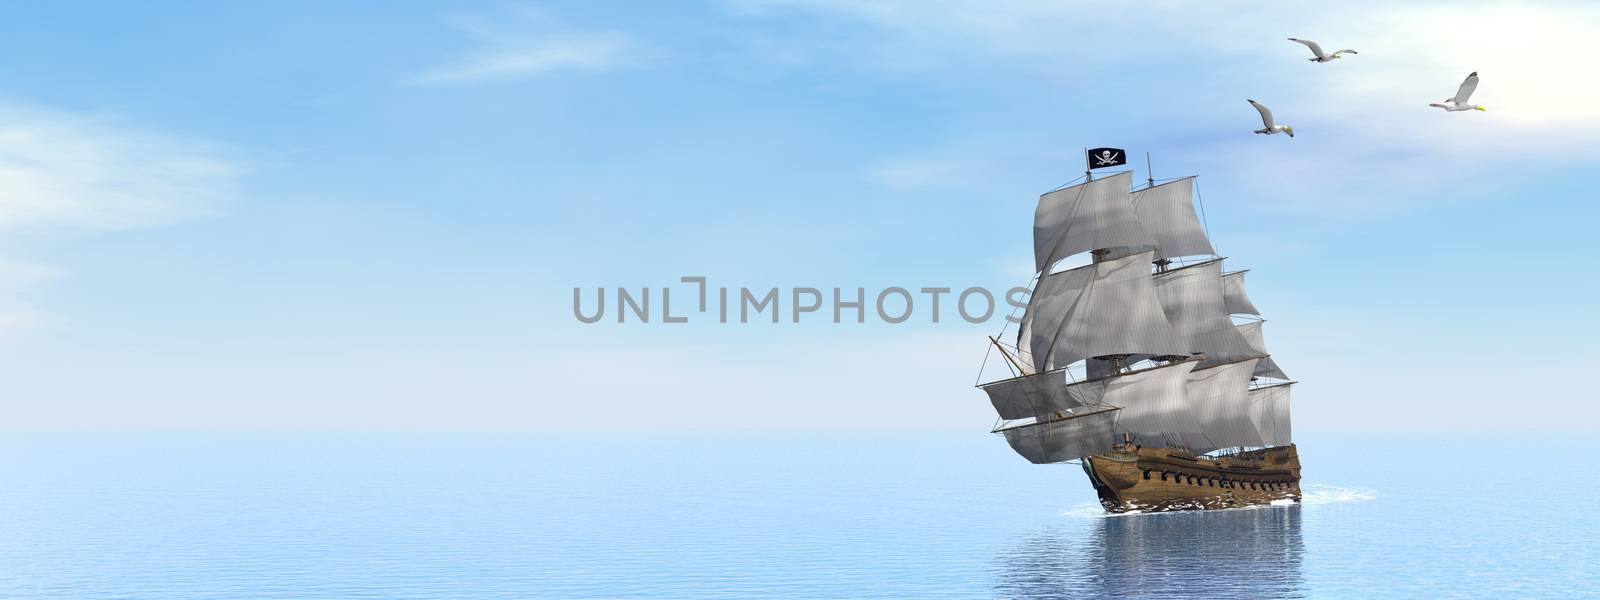 Beautiful detailed Pirate Ship, floating on the ocean surrounded with seagulls by day - 3D render